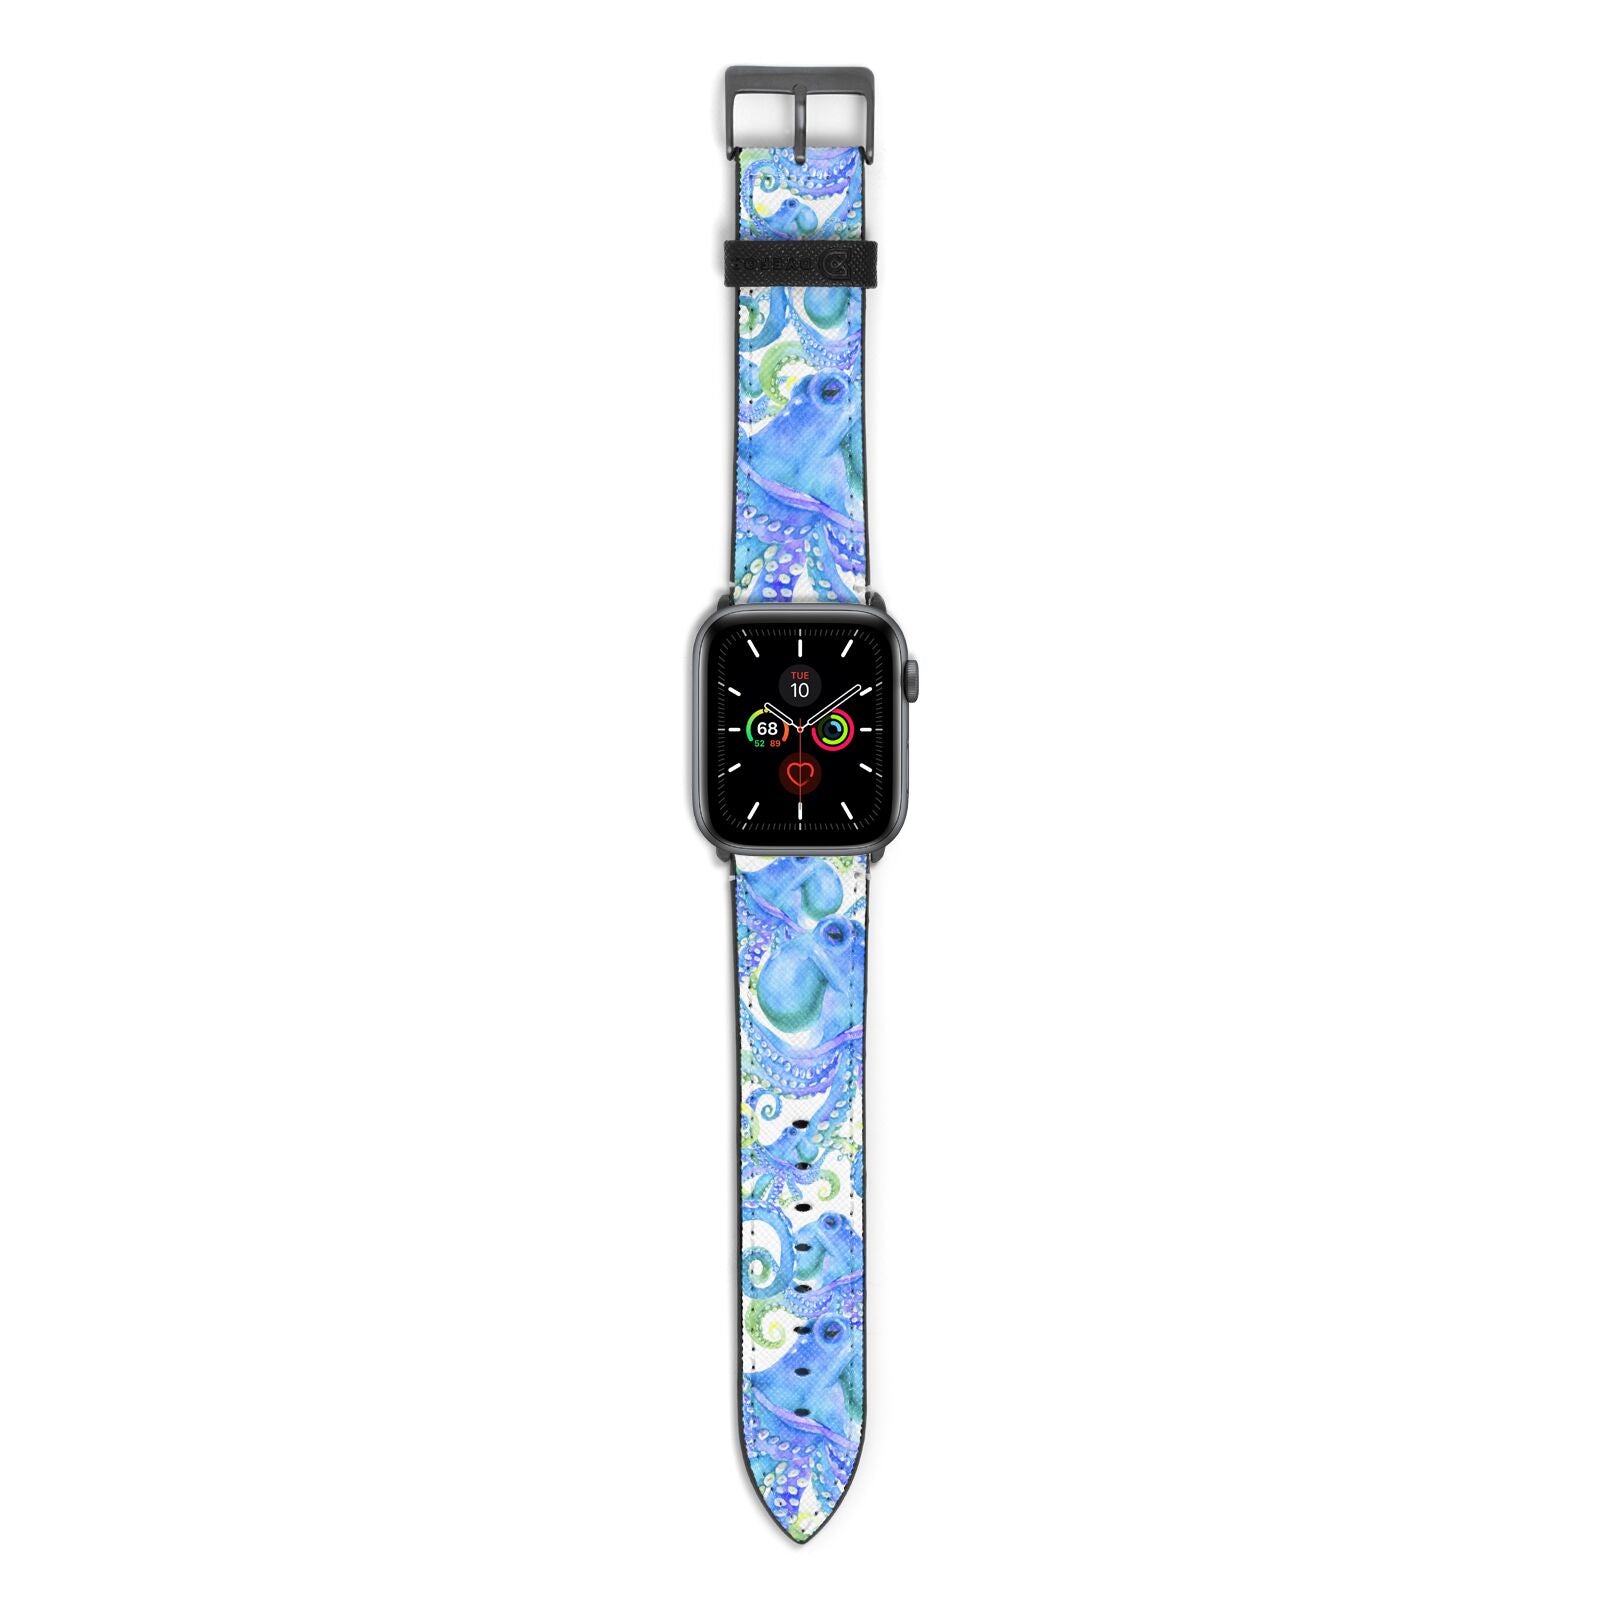 Octopus Apple Watch Strap with Space Grey Hardware